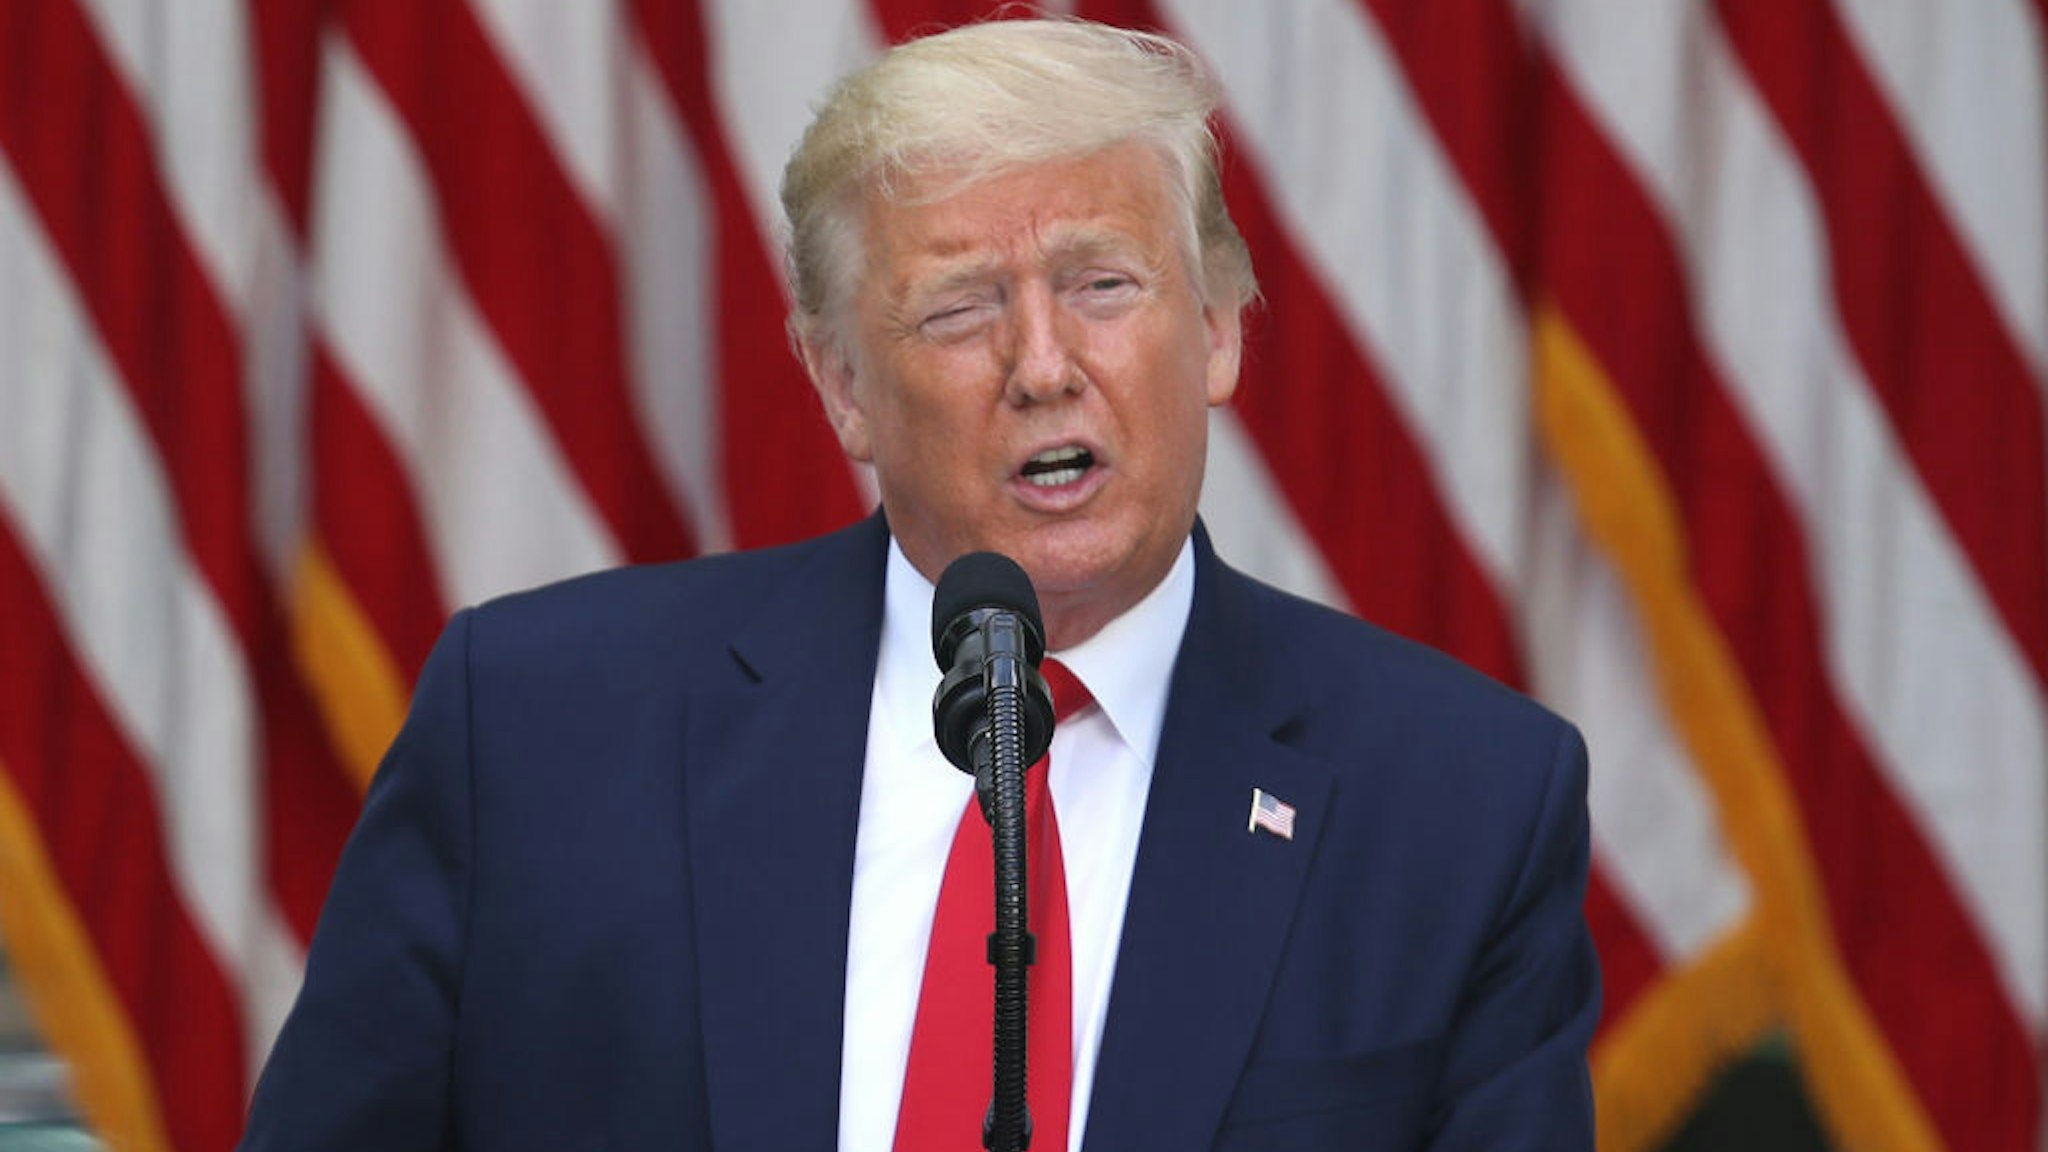 U.S. President Donald Trump makes remarks during an event on protecting seniors with diabetes, in the Rose Garden at the White House on May 26, 2020 in Washington, DC.